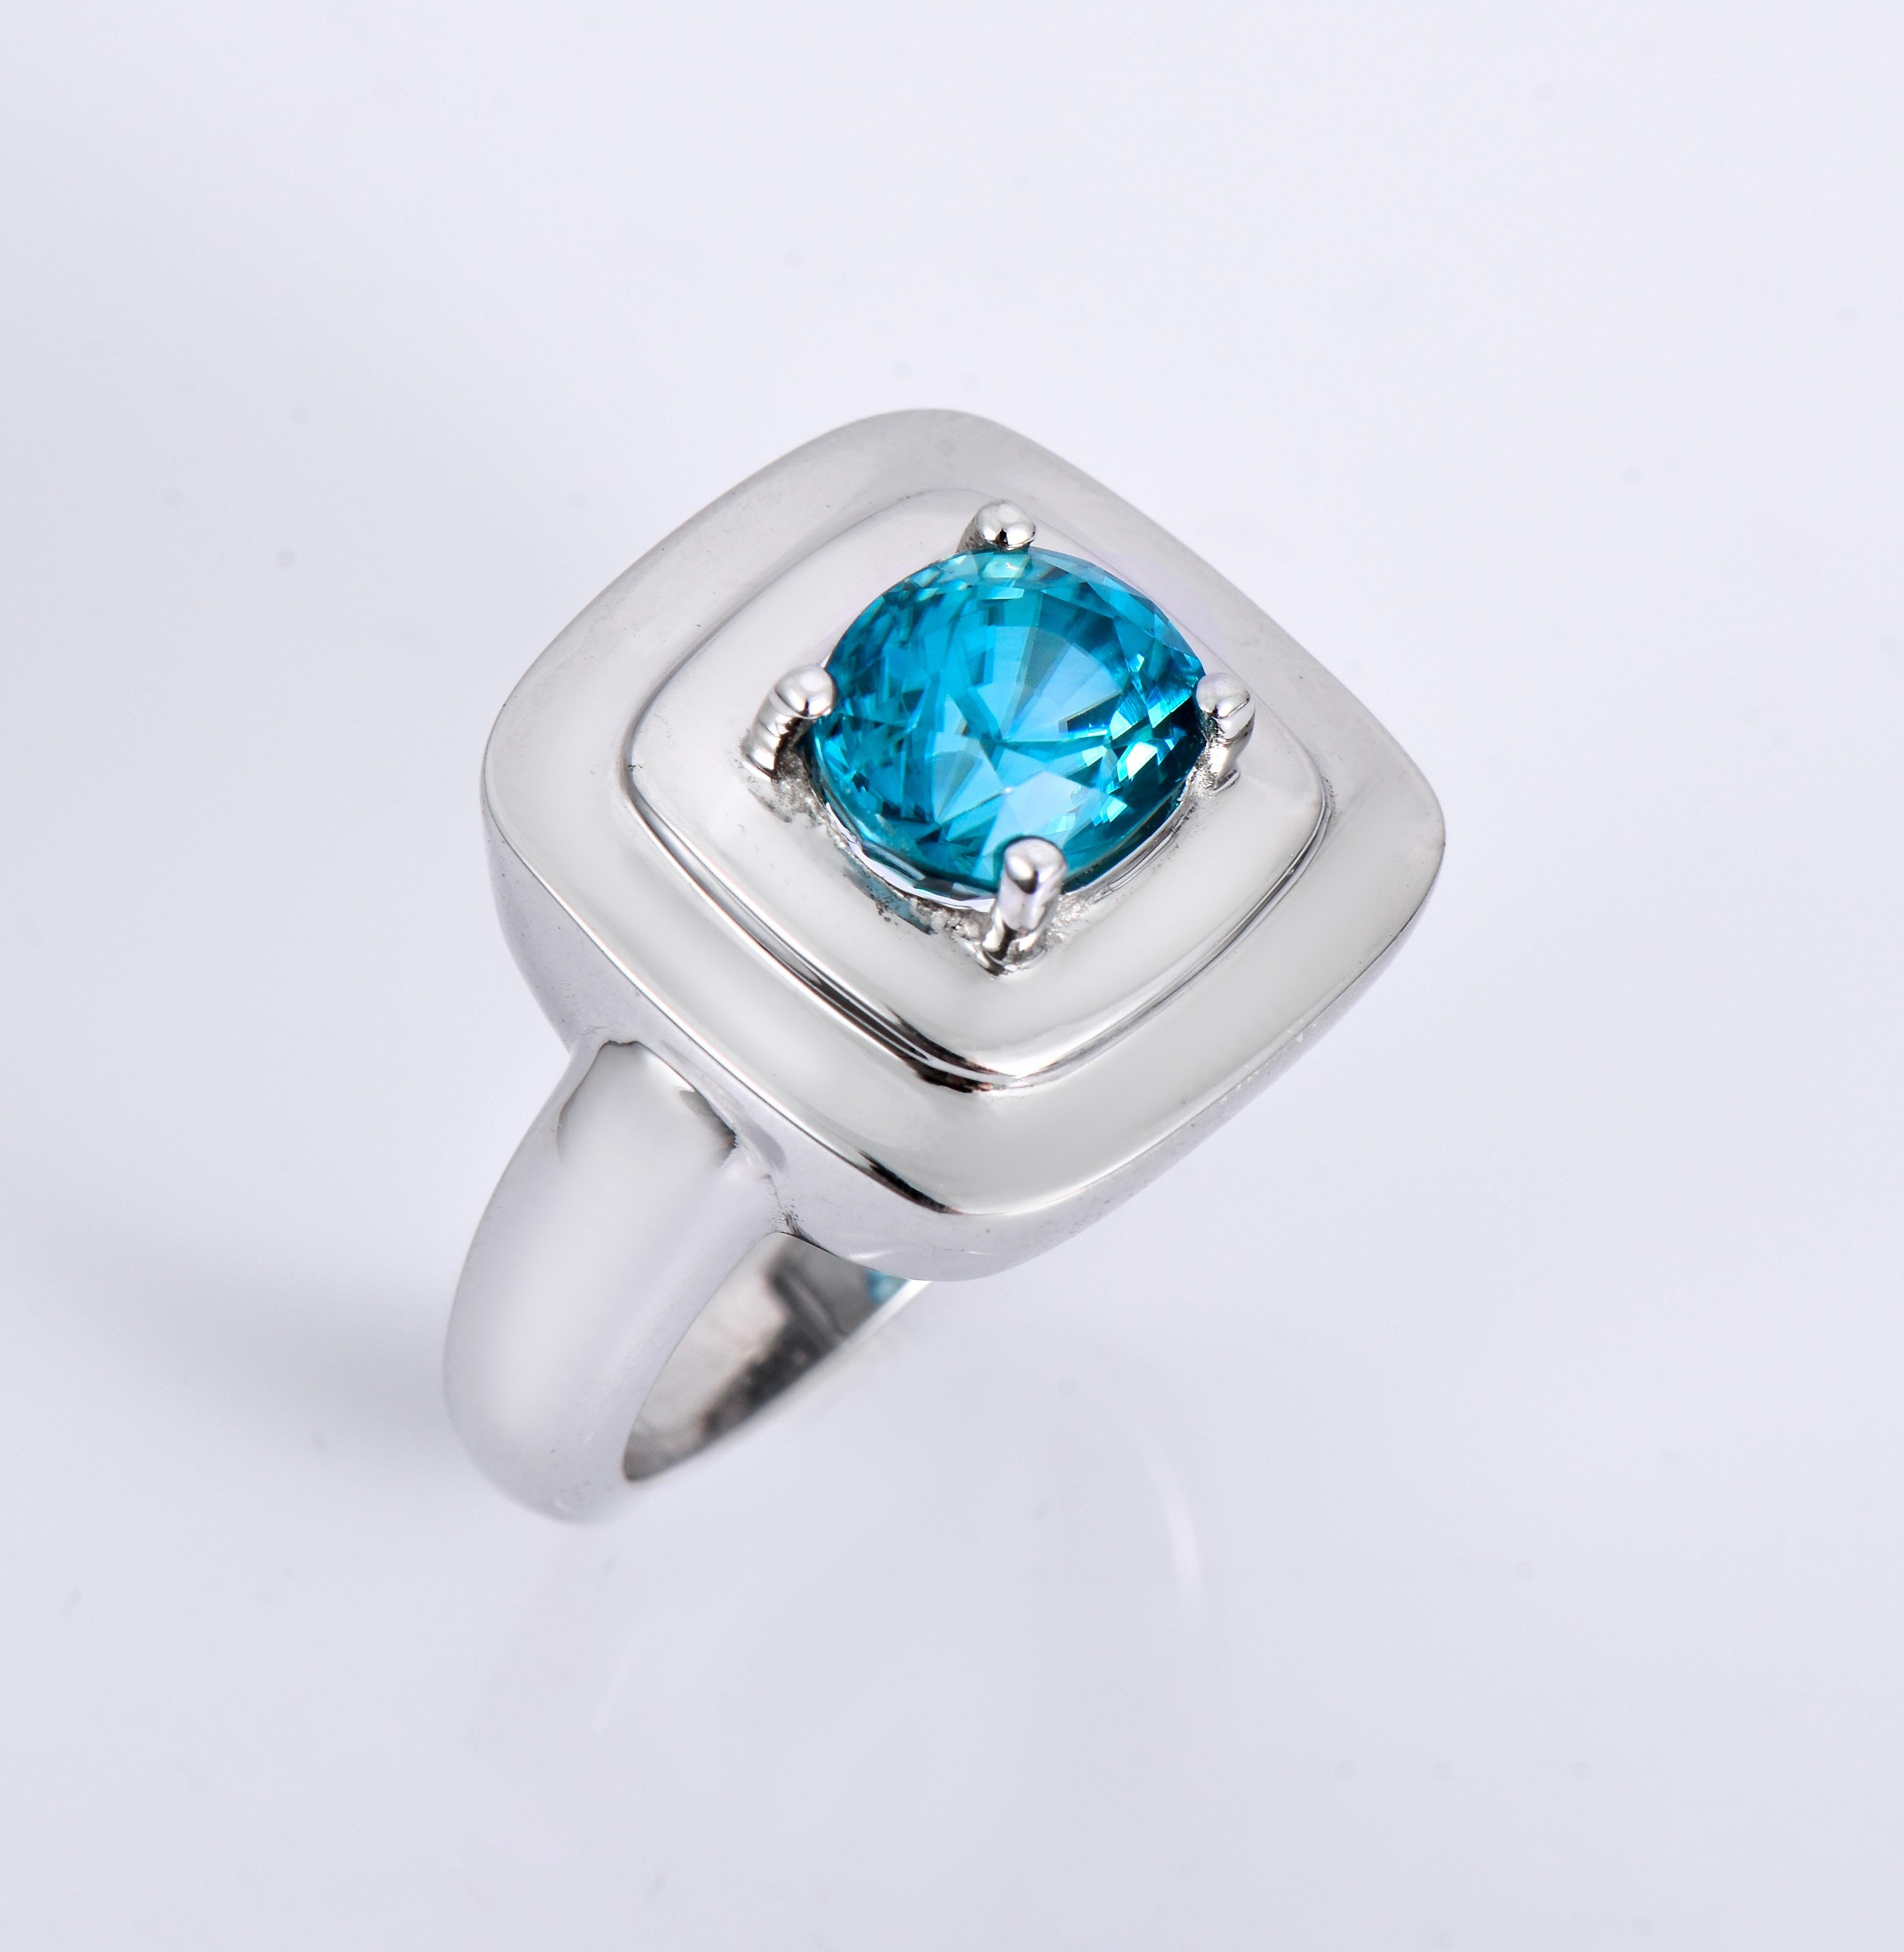 Orloff of Denmark; 925 Sterling Silver Ring set with a 6.62 carat Natural Blue Zircon

This ring is an expression of minimalist elegance, hand-crafted in 925 Sterling Silver with a sculptural design that speaks to a modern aesthetic. Its centerpiece